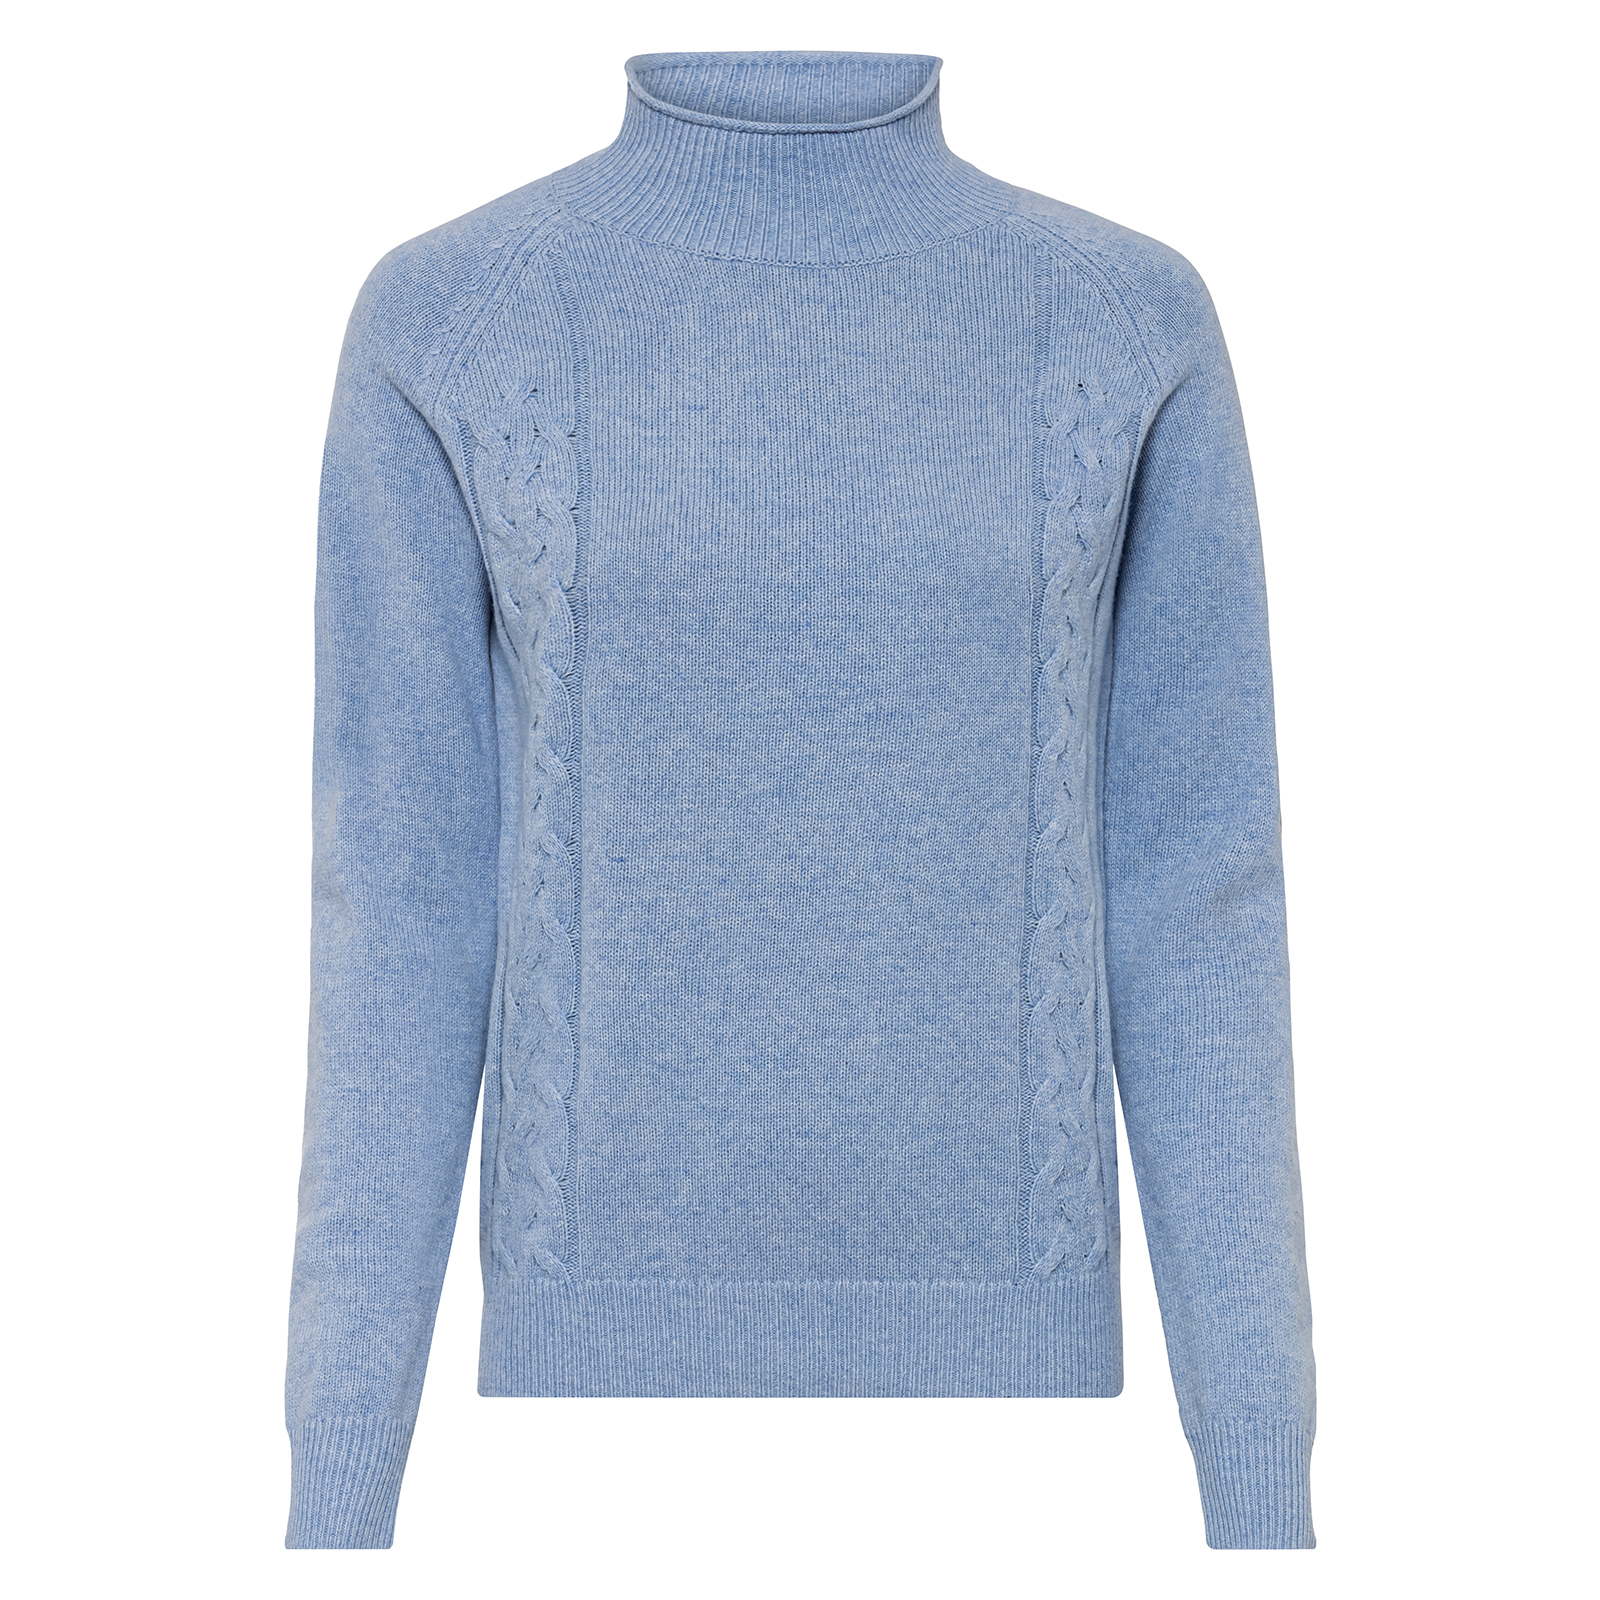 Sustainable ladies' knitted sweater with merino wool